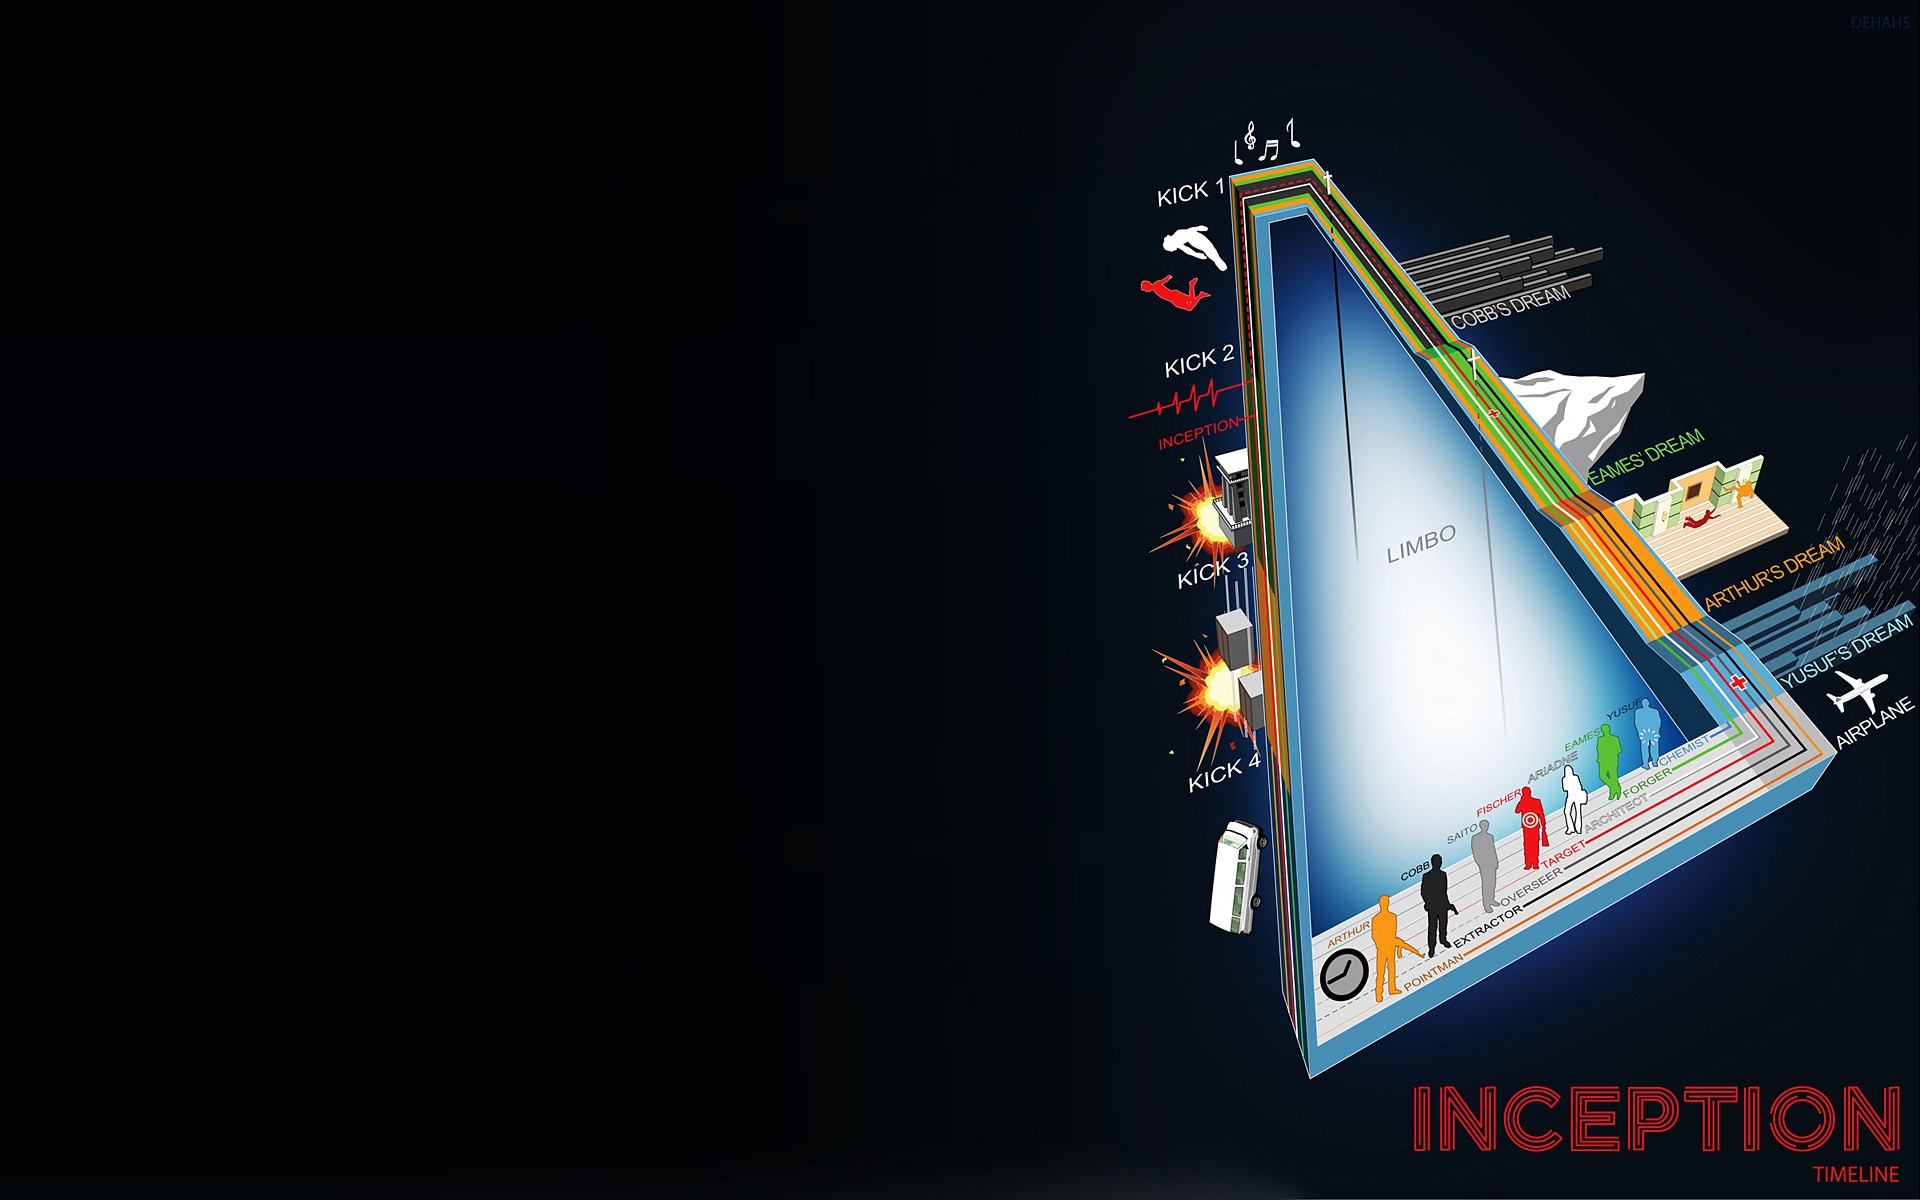 Inception Infographic - HD Wallpaper 